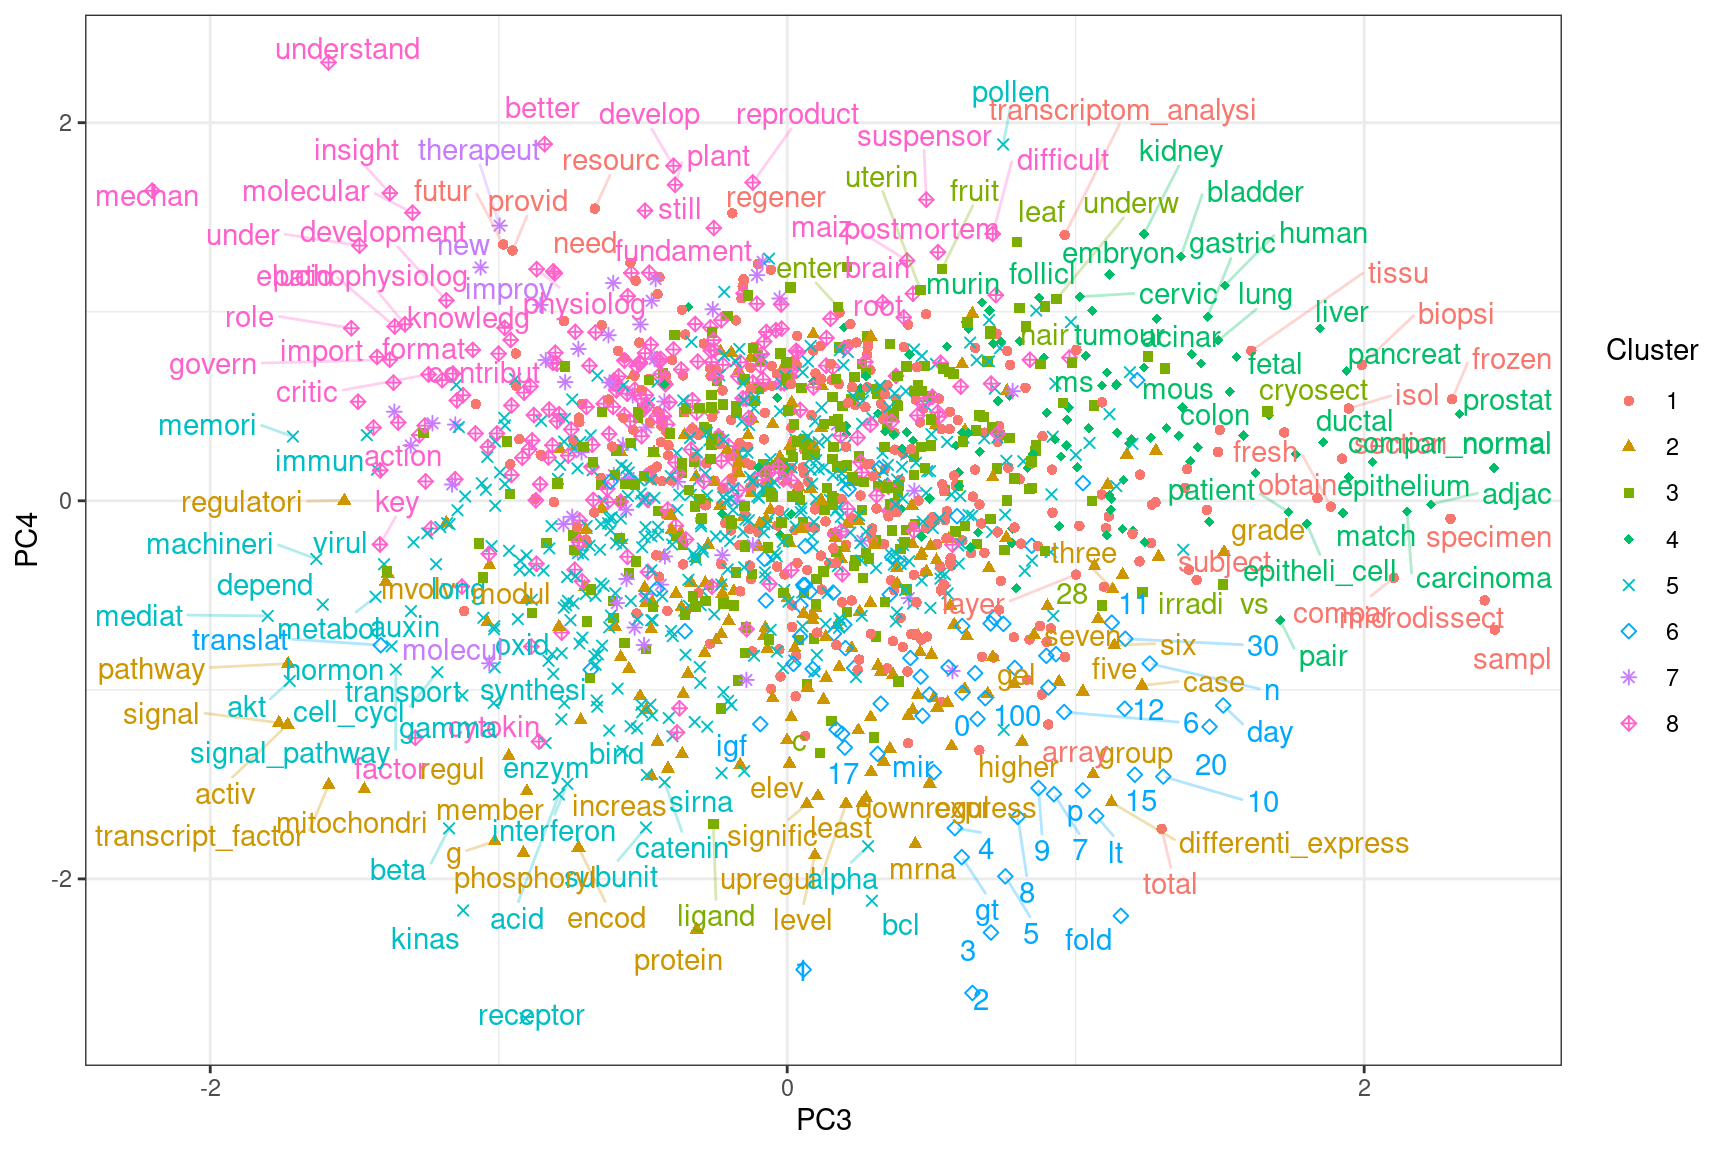 Projection of word embeddings into the 3rd and 4th PCs.